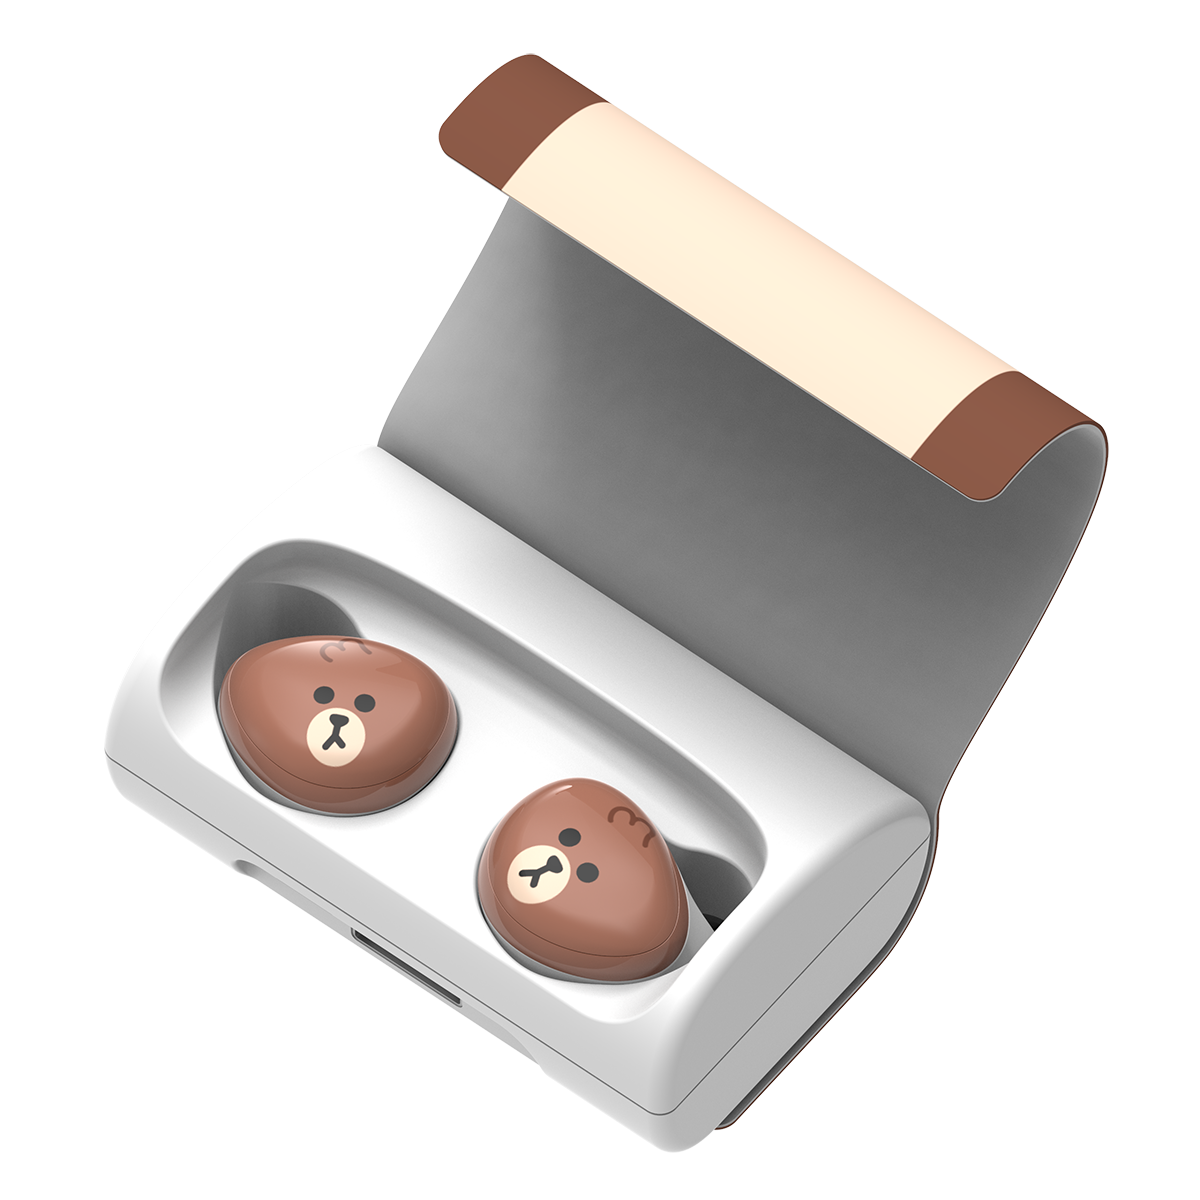 LINE FRIENDS MEETS thecoopidea BEANS+ True Wireless Earbuds - MINI BROWN